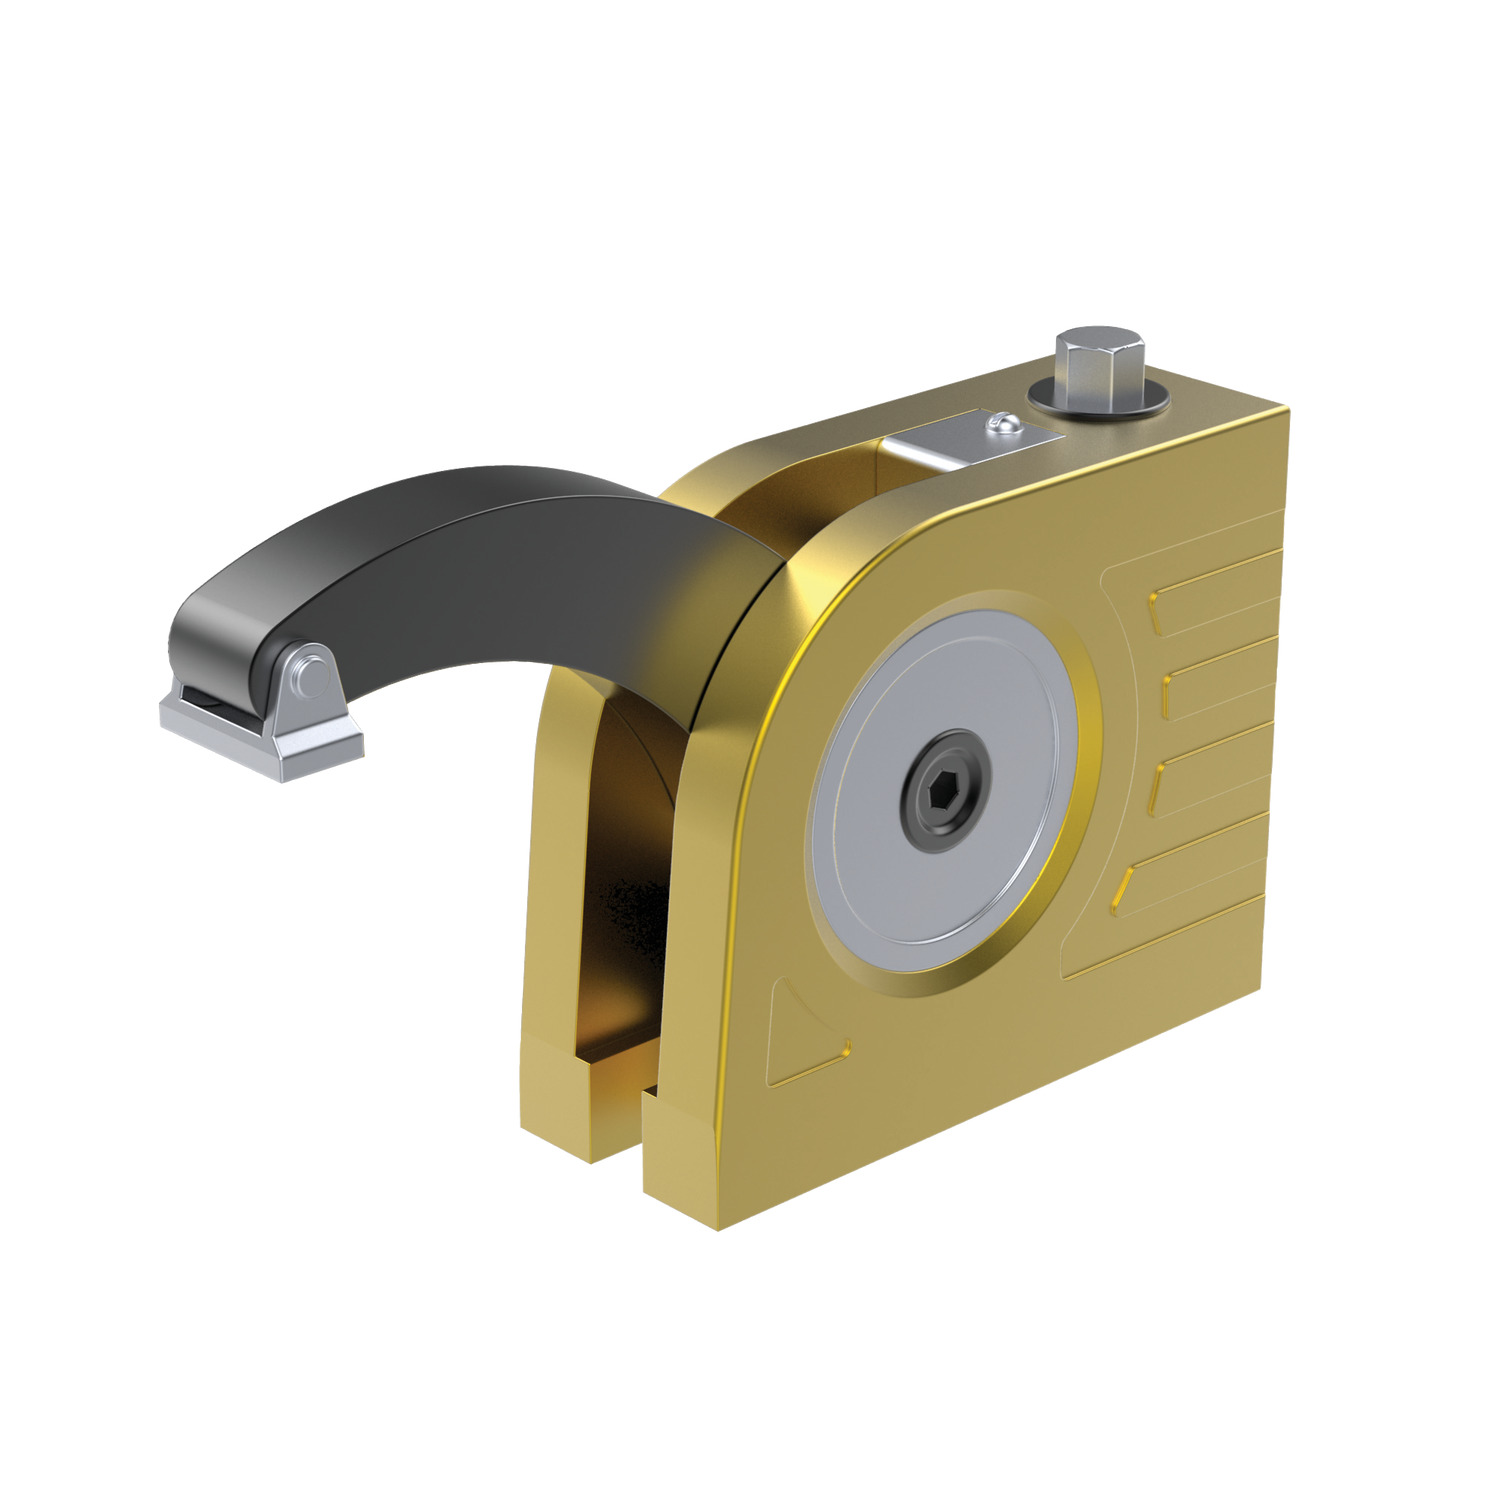 Monobloc Clamps The Kopal Mono Bloc Clamps are multi-purpose and uses its aluminium swivel shoe to push down on the top of the workpiece providing upto 16kN clamping force.